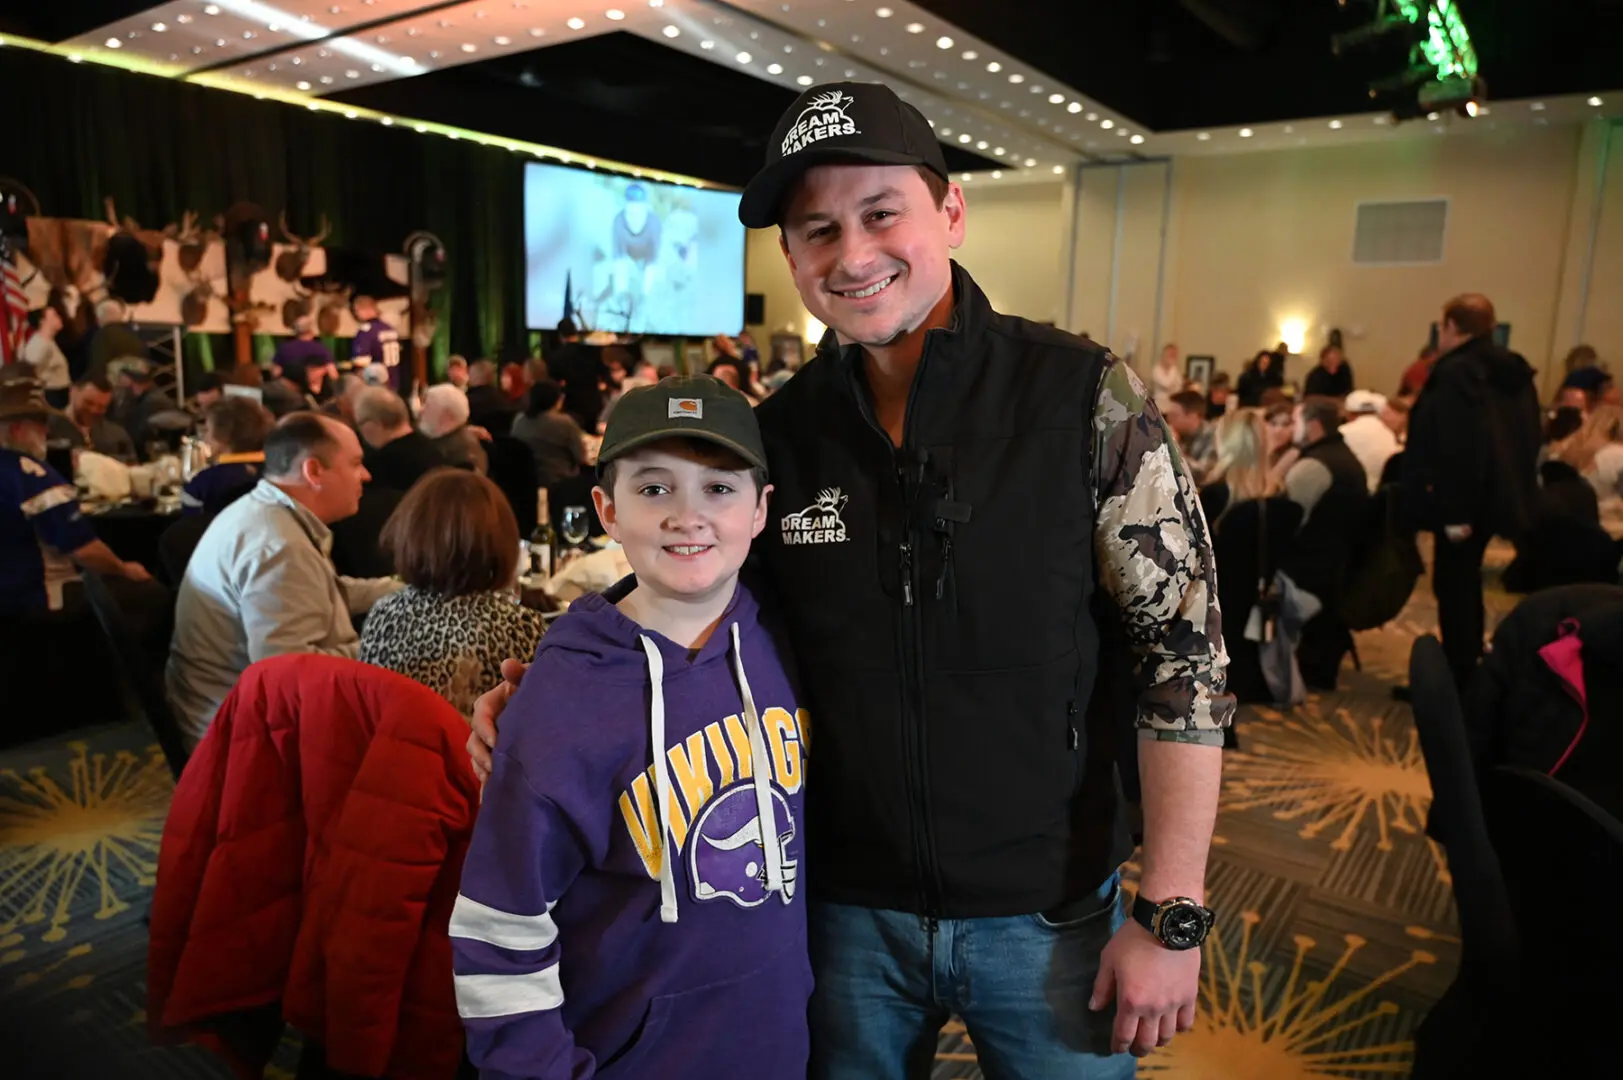 A man and boy posing for the camera at an event.